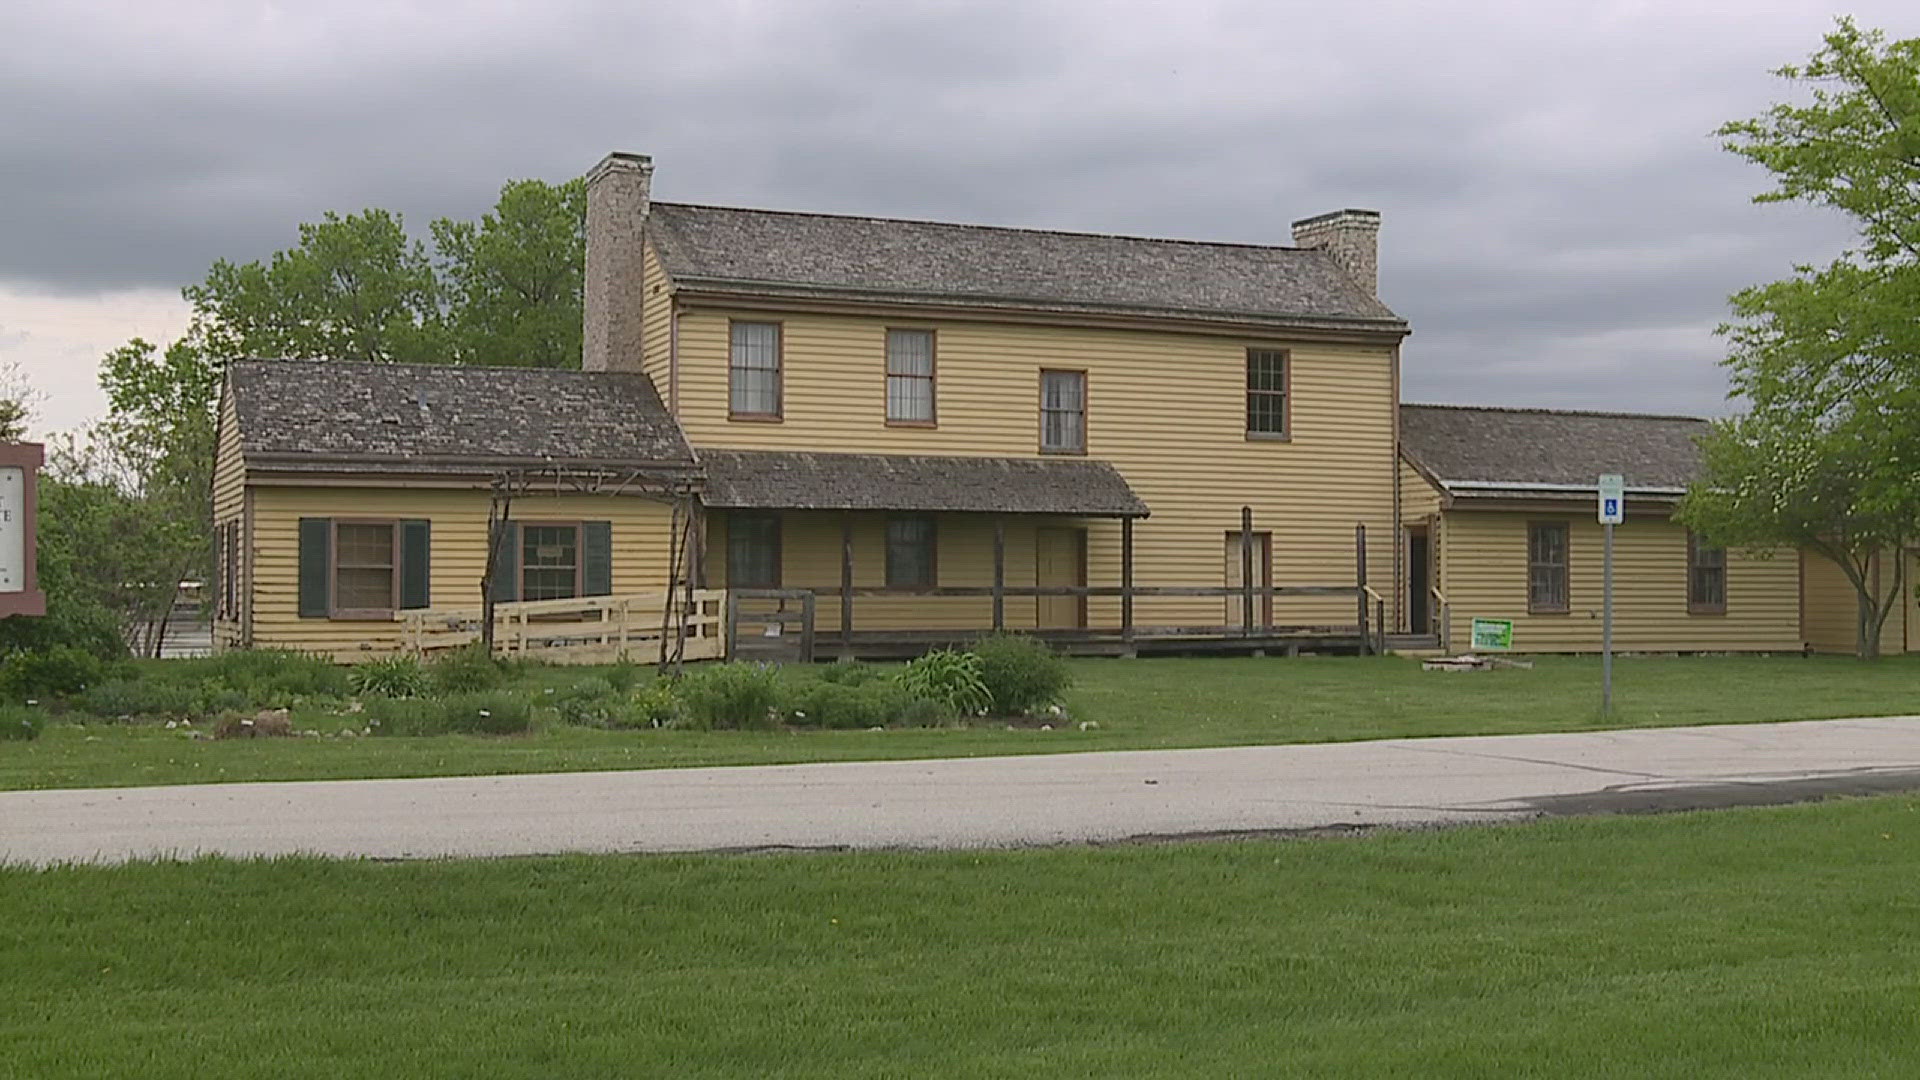 According to historians, Colonel George Davenport's home was the first permanent house in the city — making him one of the earliest settlers in the area.